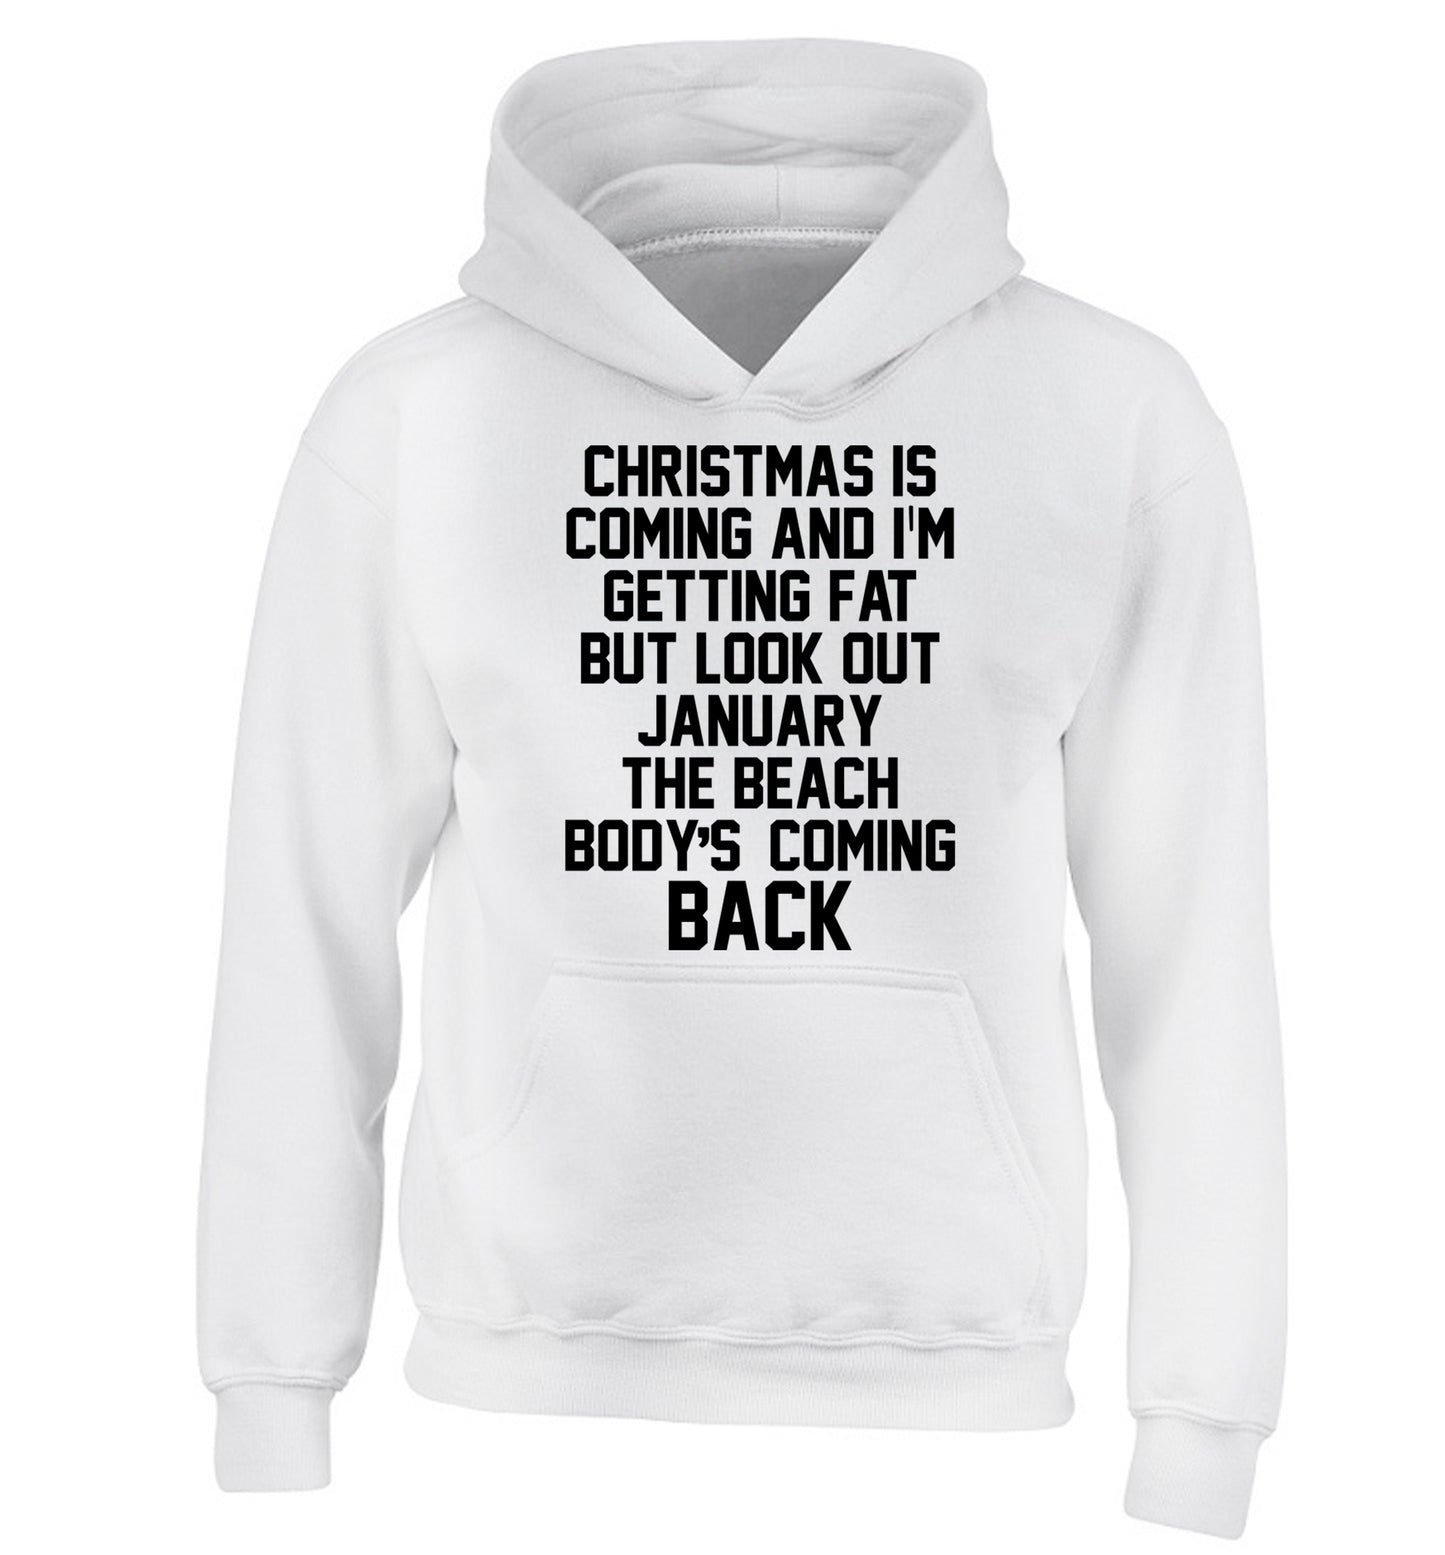 Christmas is coming and I'm getting fat but look out January the beach body's coming back! children's white hoodie 12-14 Years